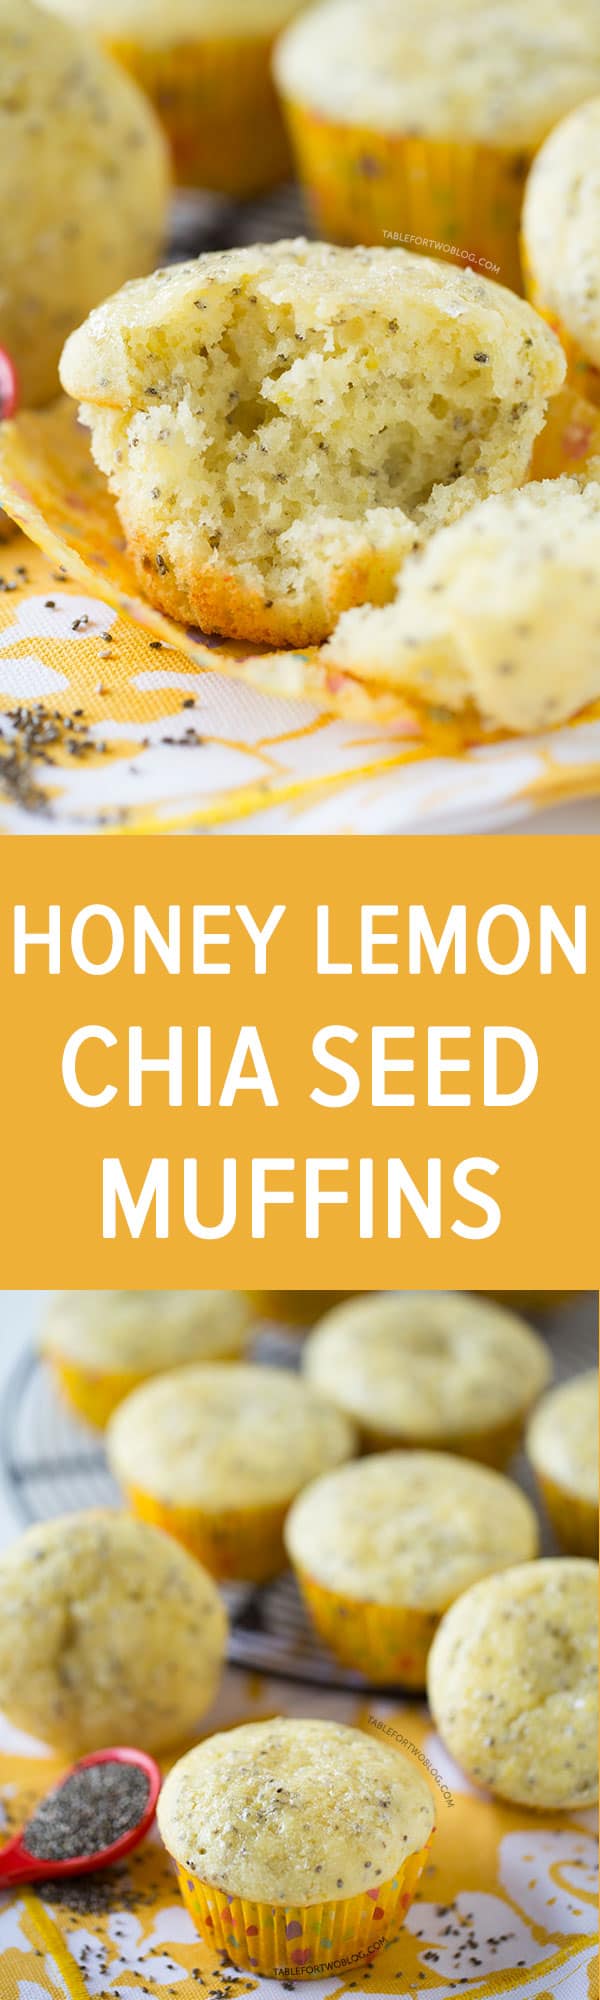 Honey lemon chia seed muffins are the perfect muffins to bring Spring year-round into your kitchen! Recipe on tablefortwoblog.com